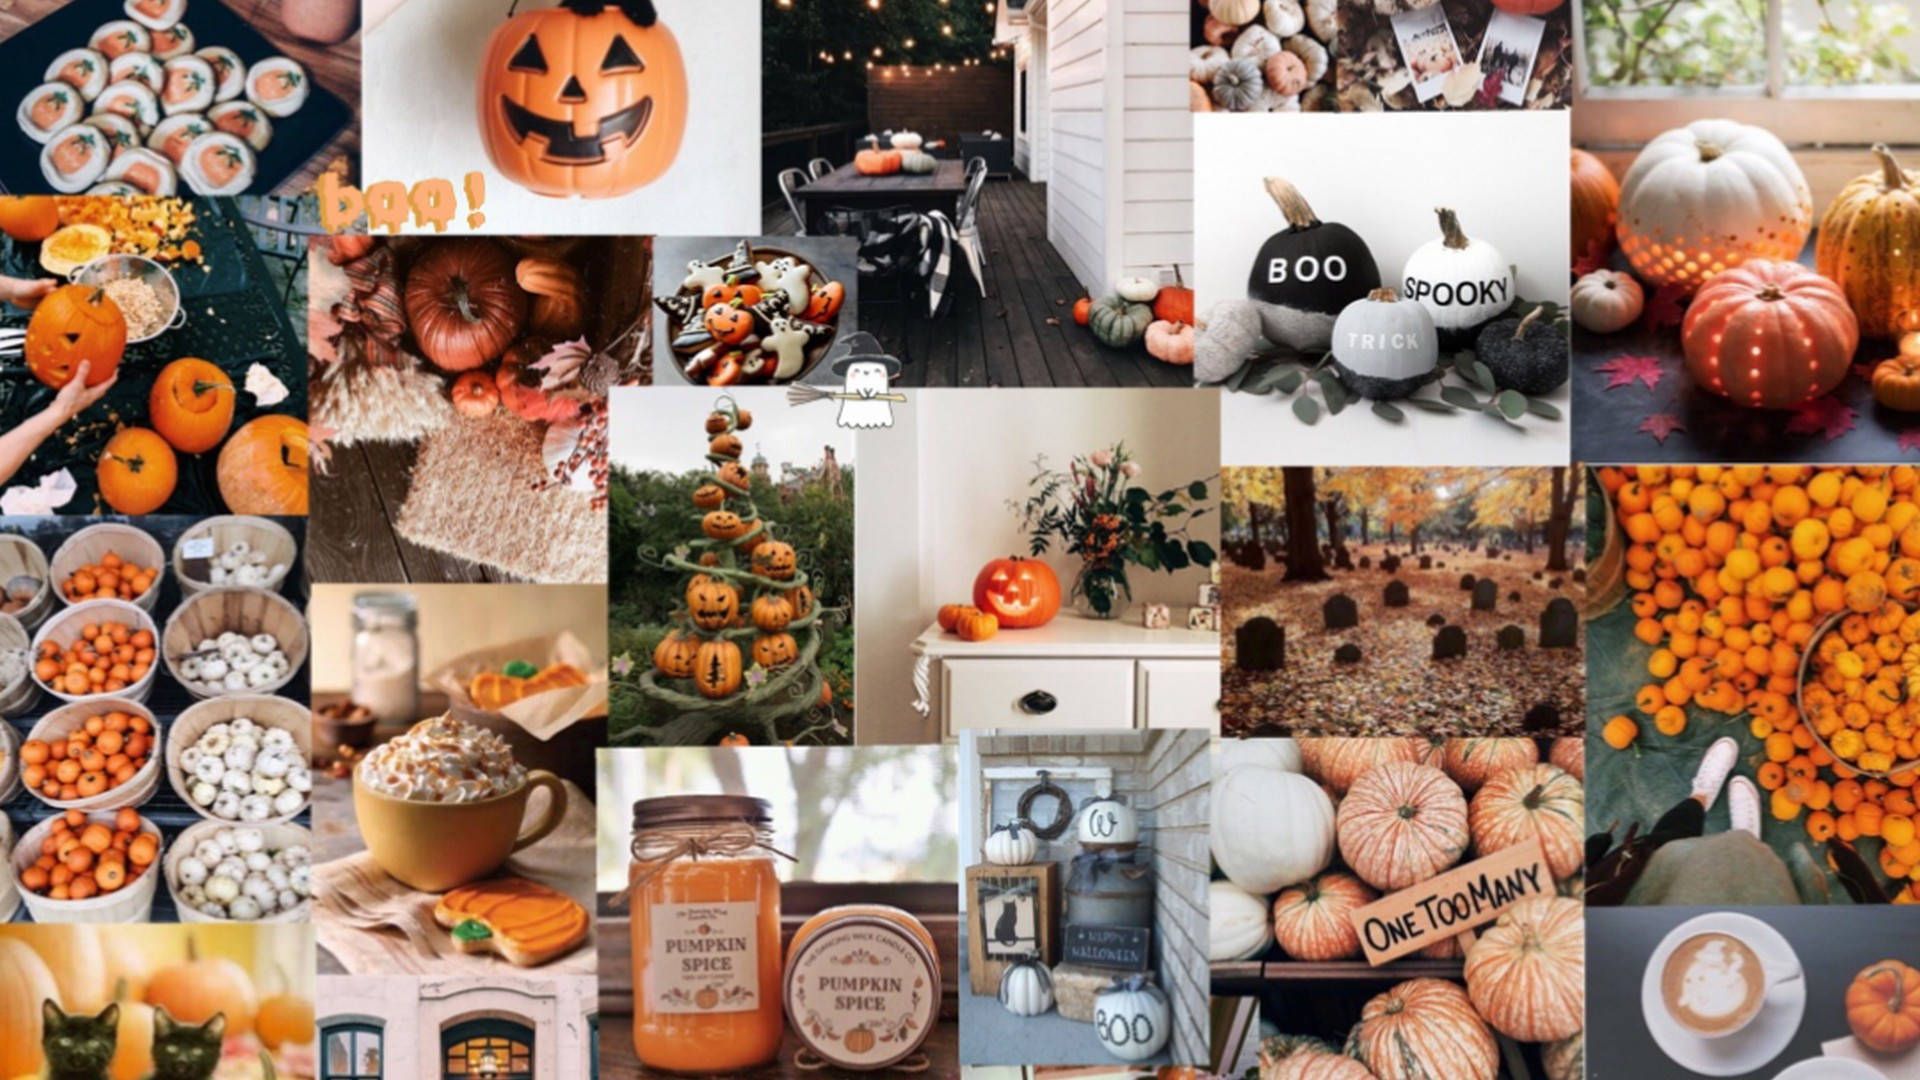 A collage of Halloween and autumn themed images including pumpkins, cookies, and coffee. - Halloween desktop, pumpkin